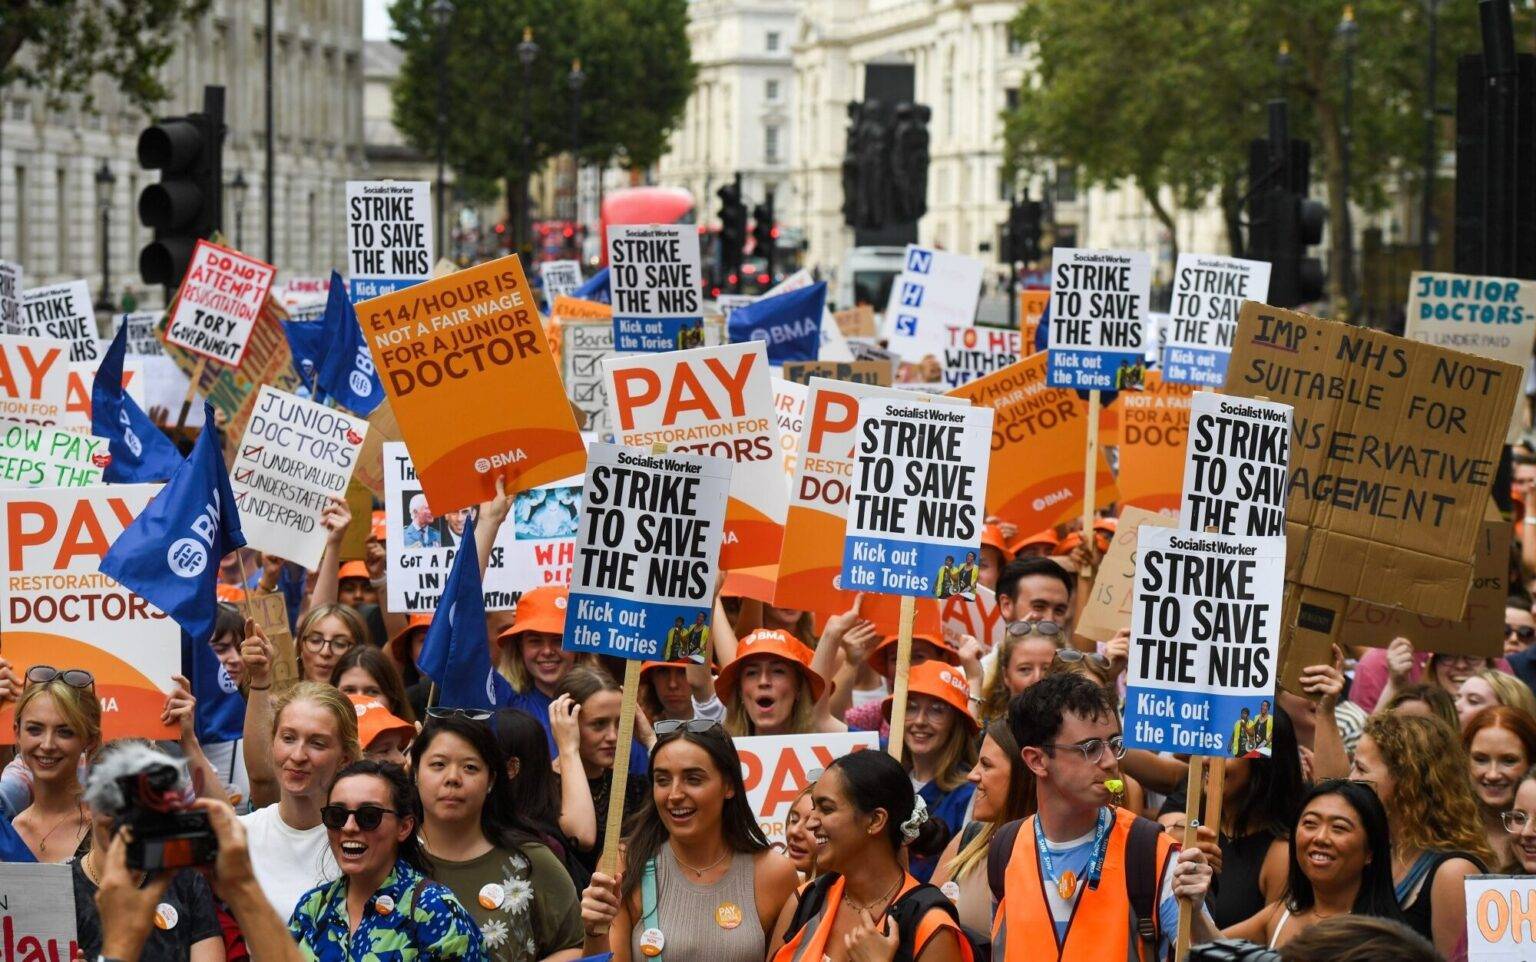 England’s junior doctors join consultants in joint NHS strikes